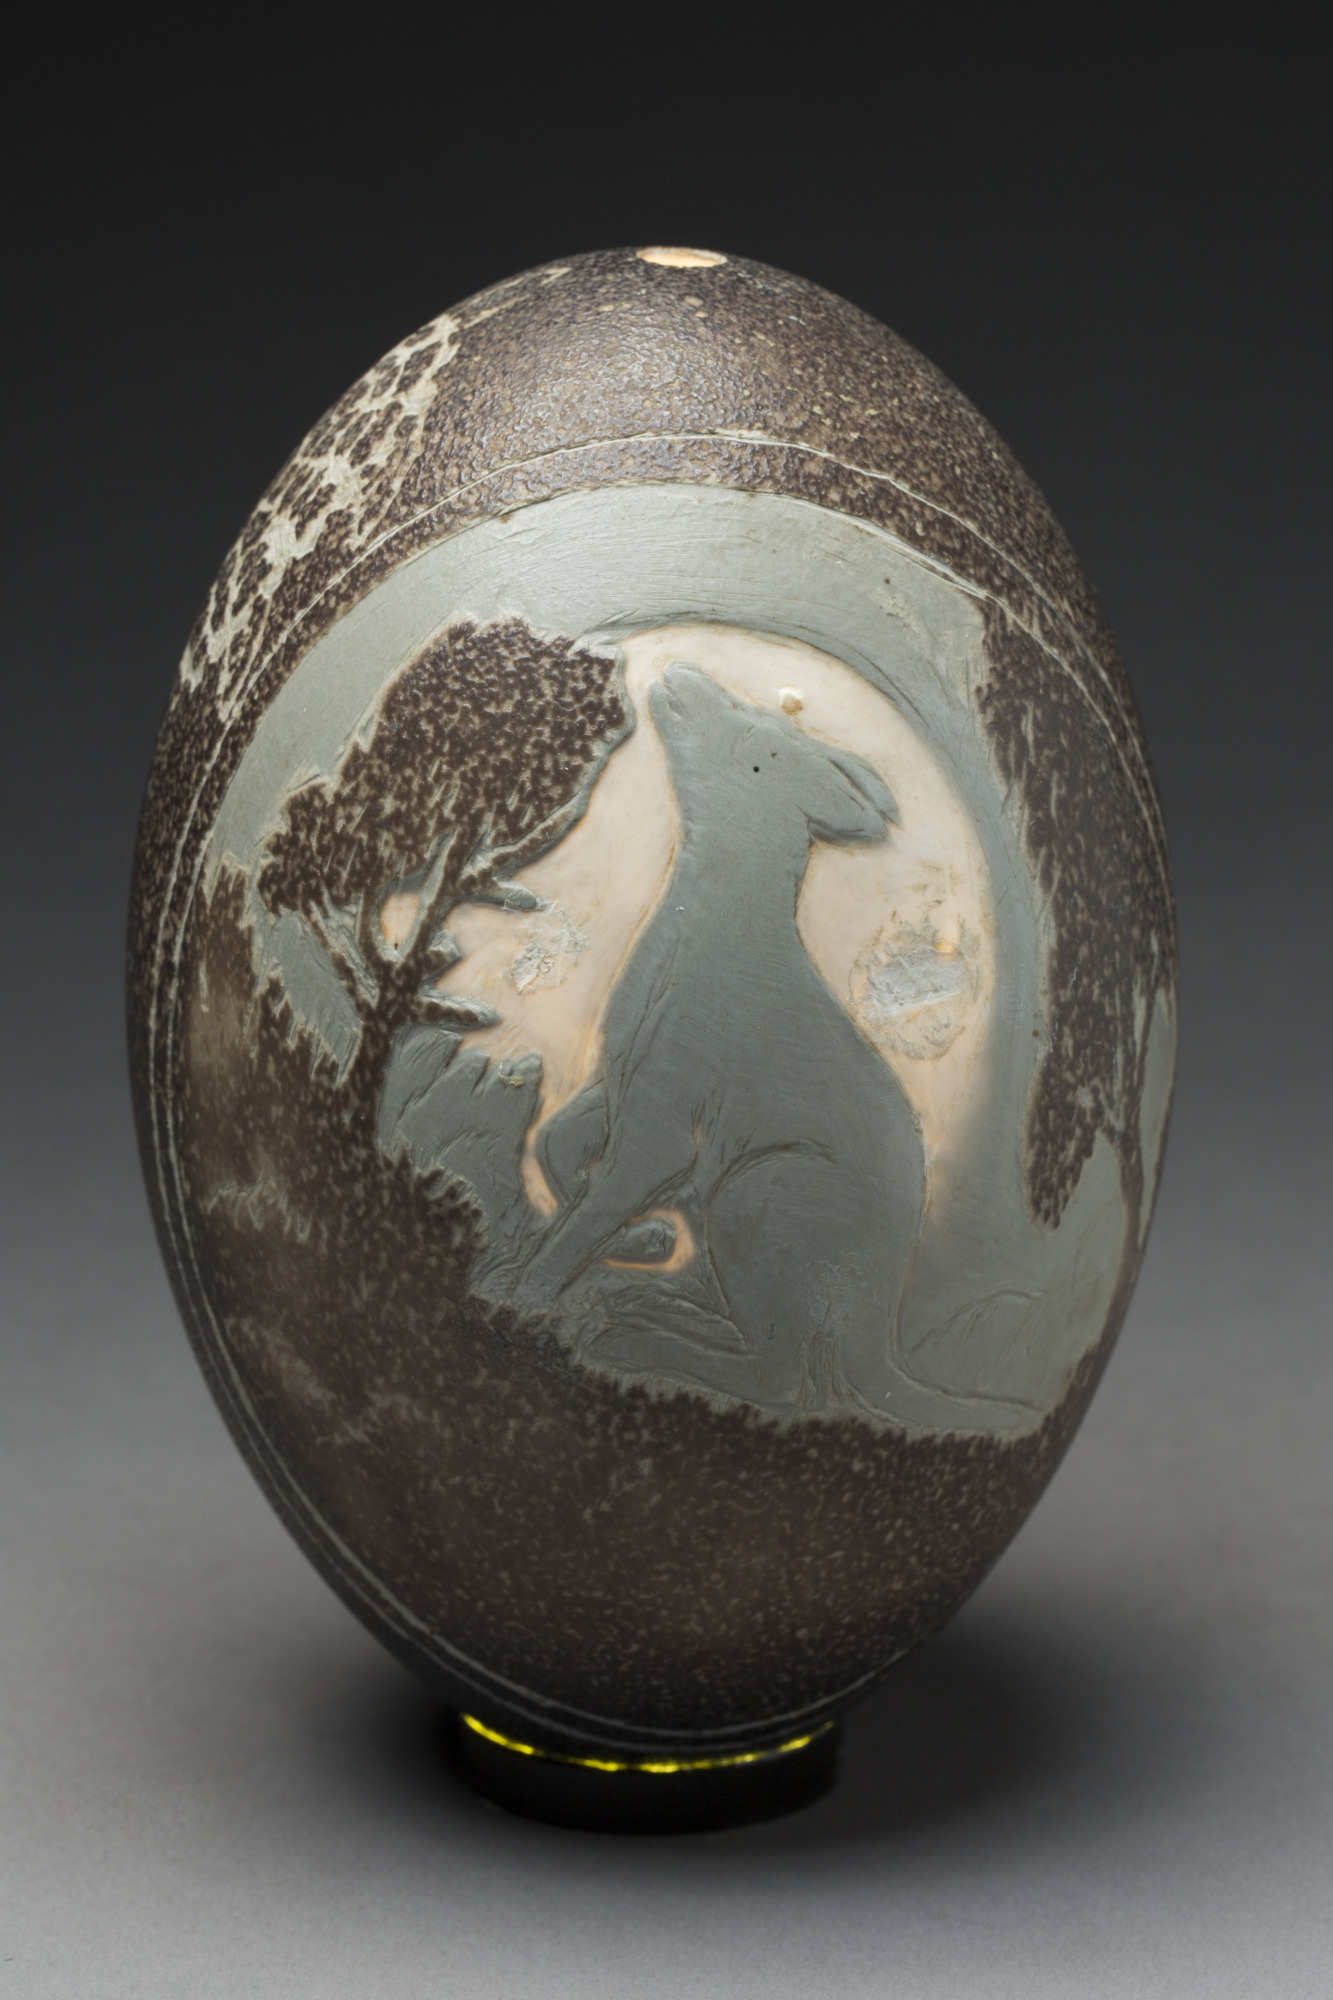 Emu egg carved with image of a dingo and possum, by Bill Reid.